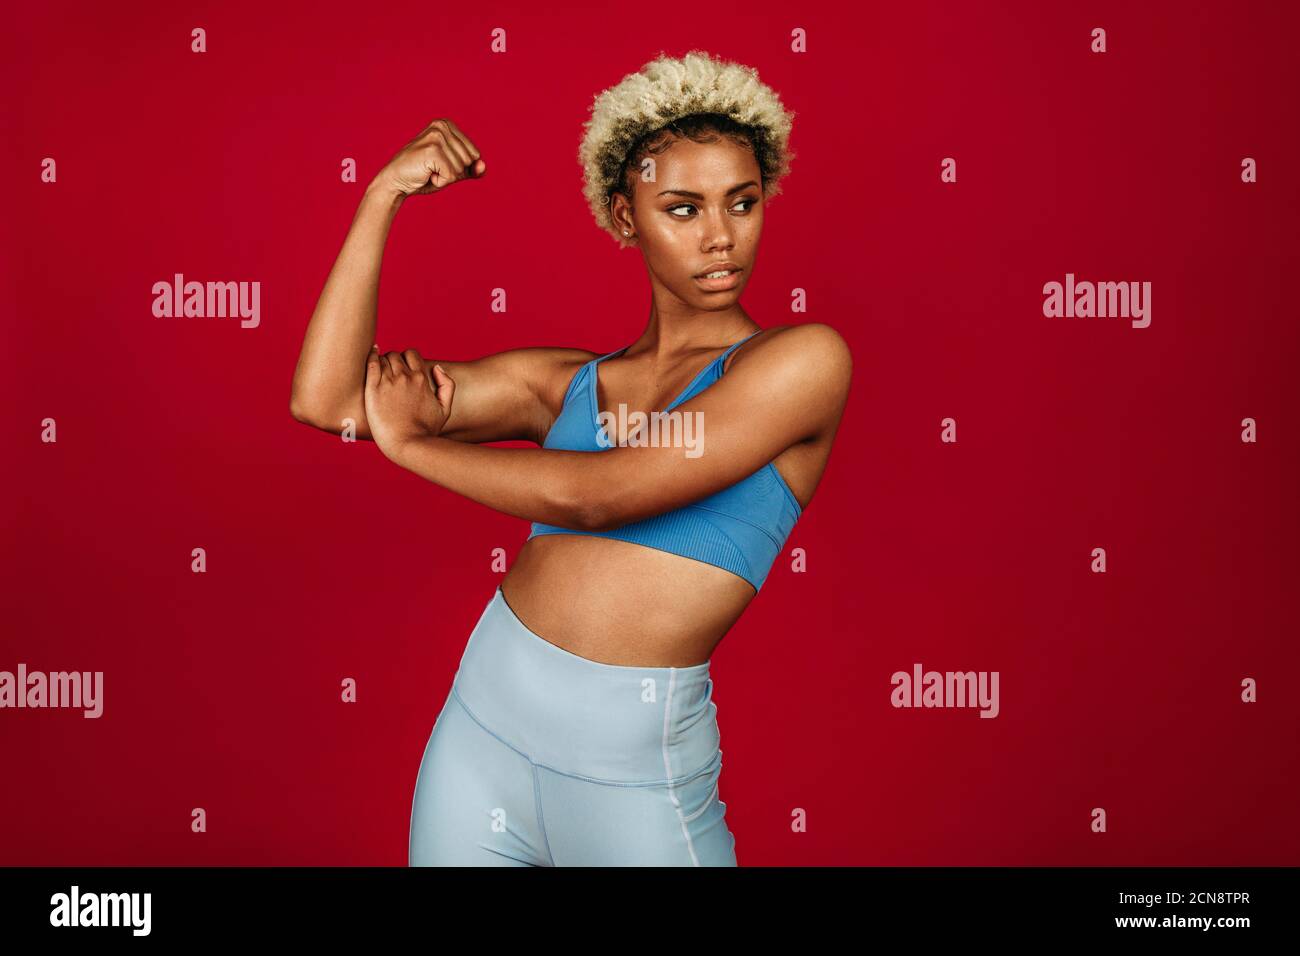 African american fitness woman standing against red background showing biceps. Portrait of woman in fitness wear doing workout. Stock Photo